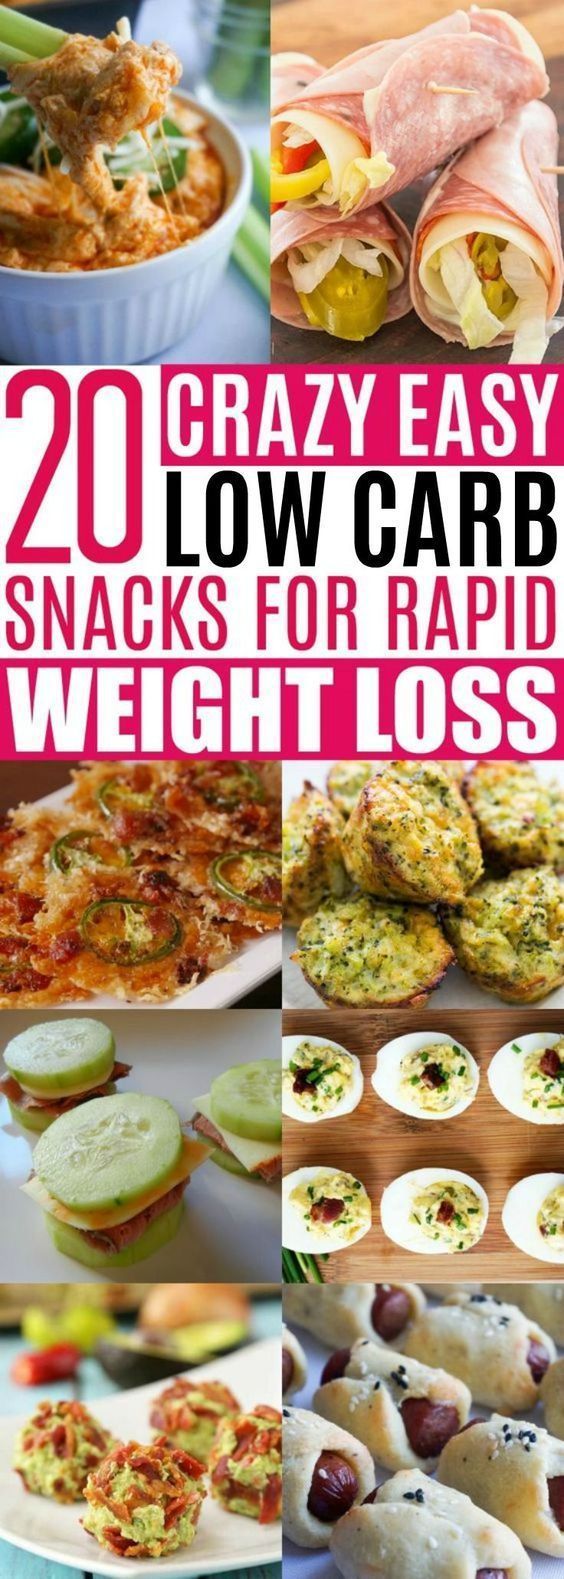 You will love these easy keto snacks for your ketogenic diet. These are the best keto friendly snacks that will help you lose weight and stay in ketosis.